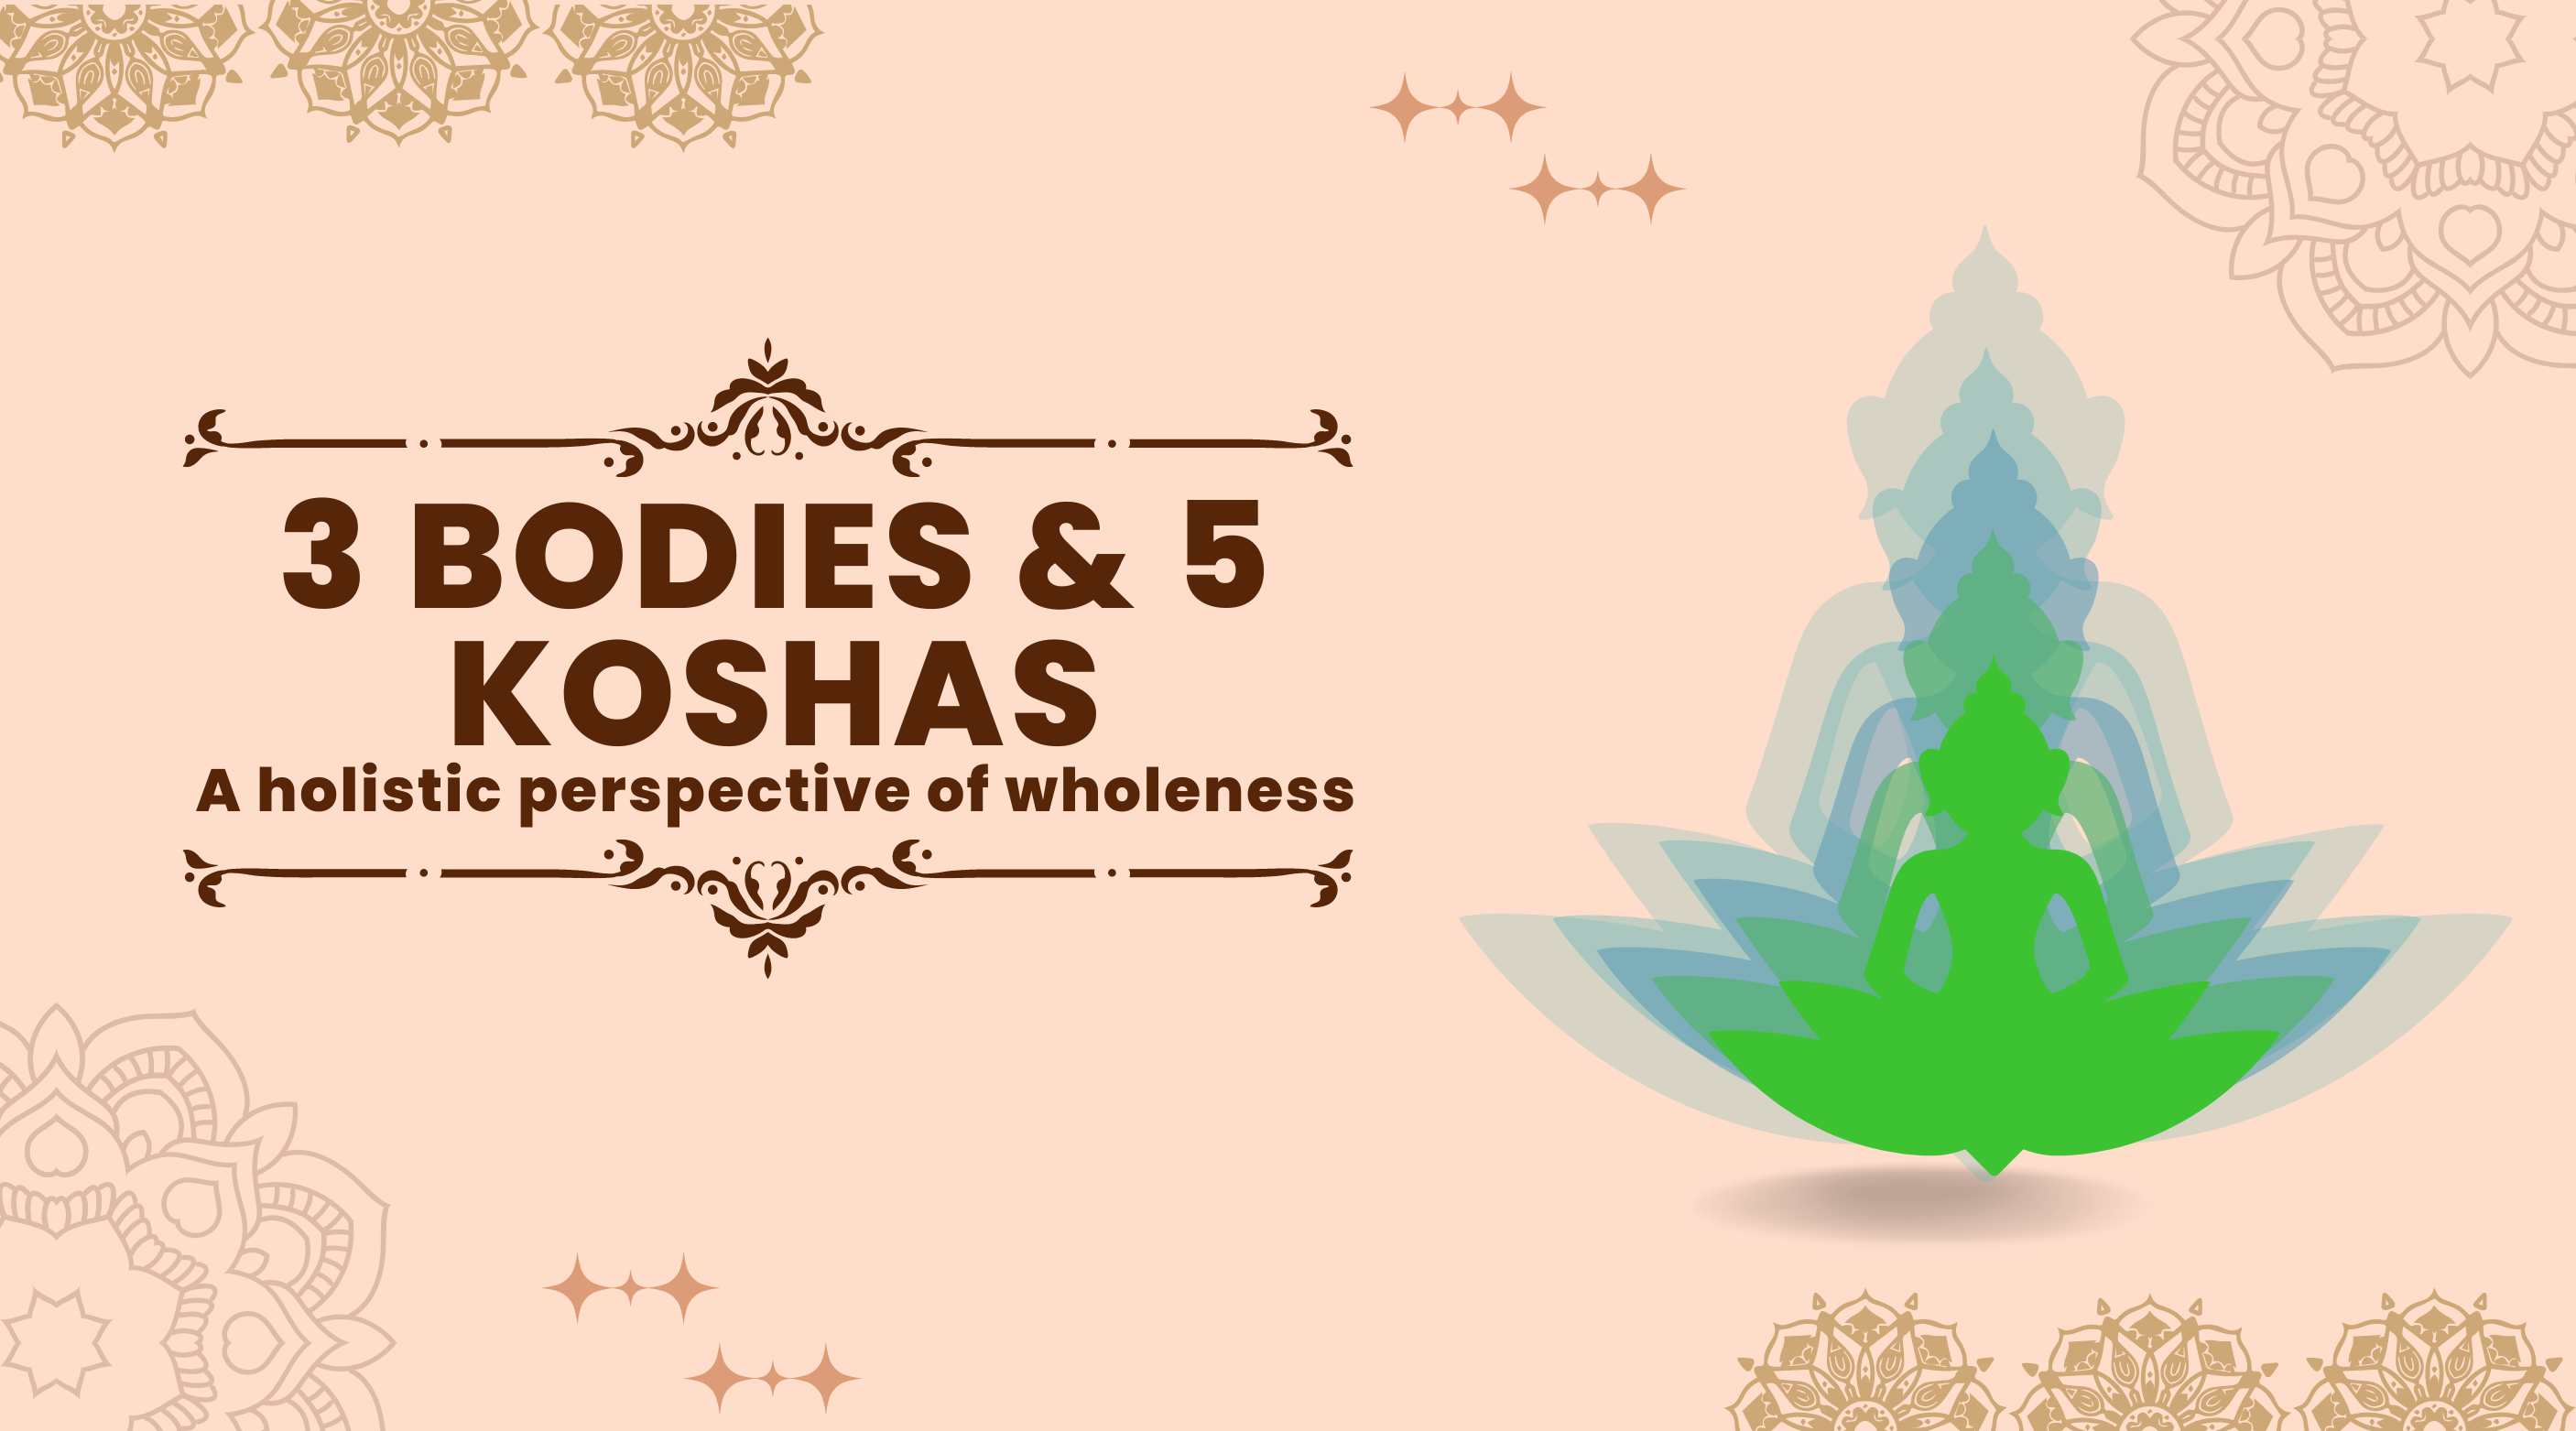 3 Bodies & 5 Koshas: A holistic perspective of wholeness